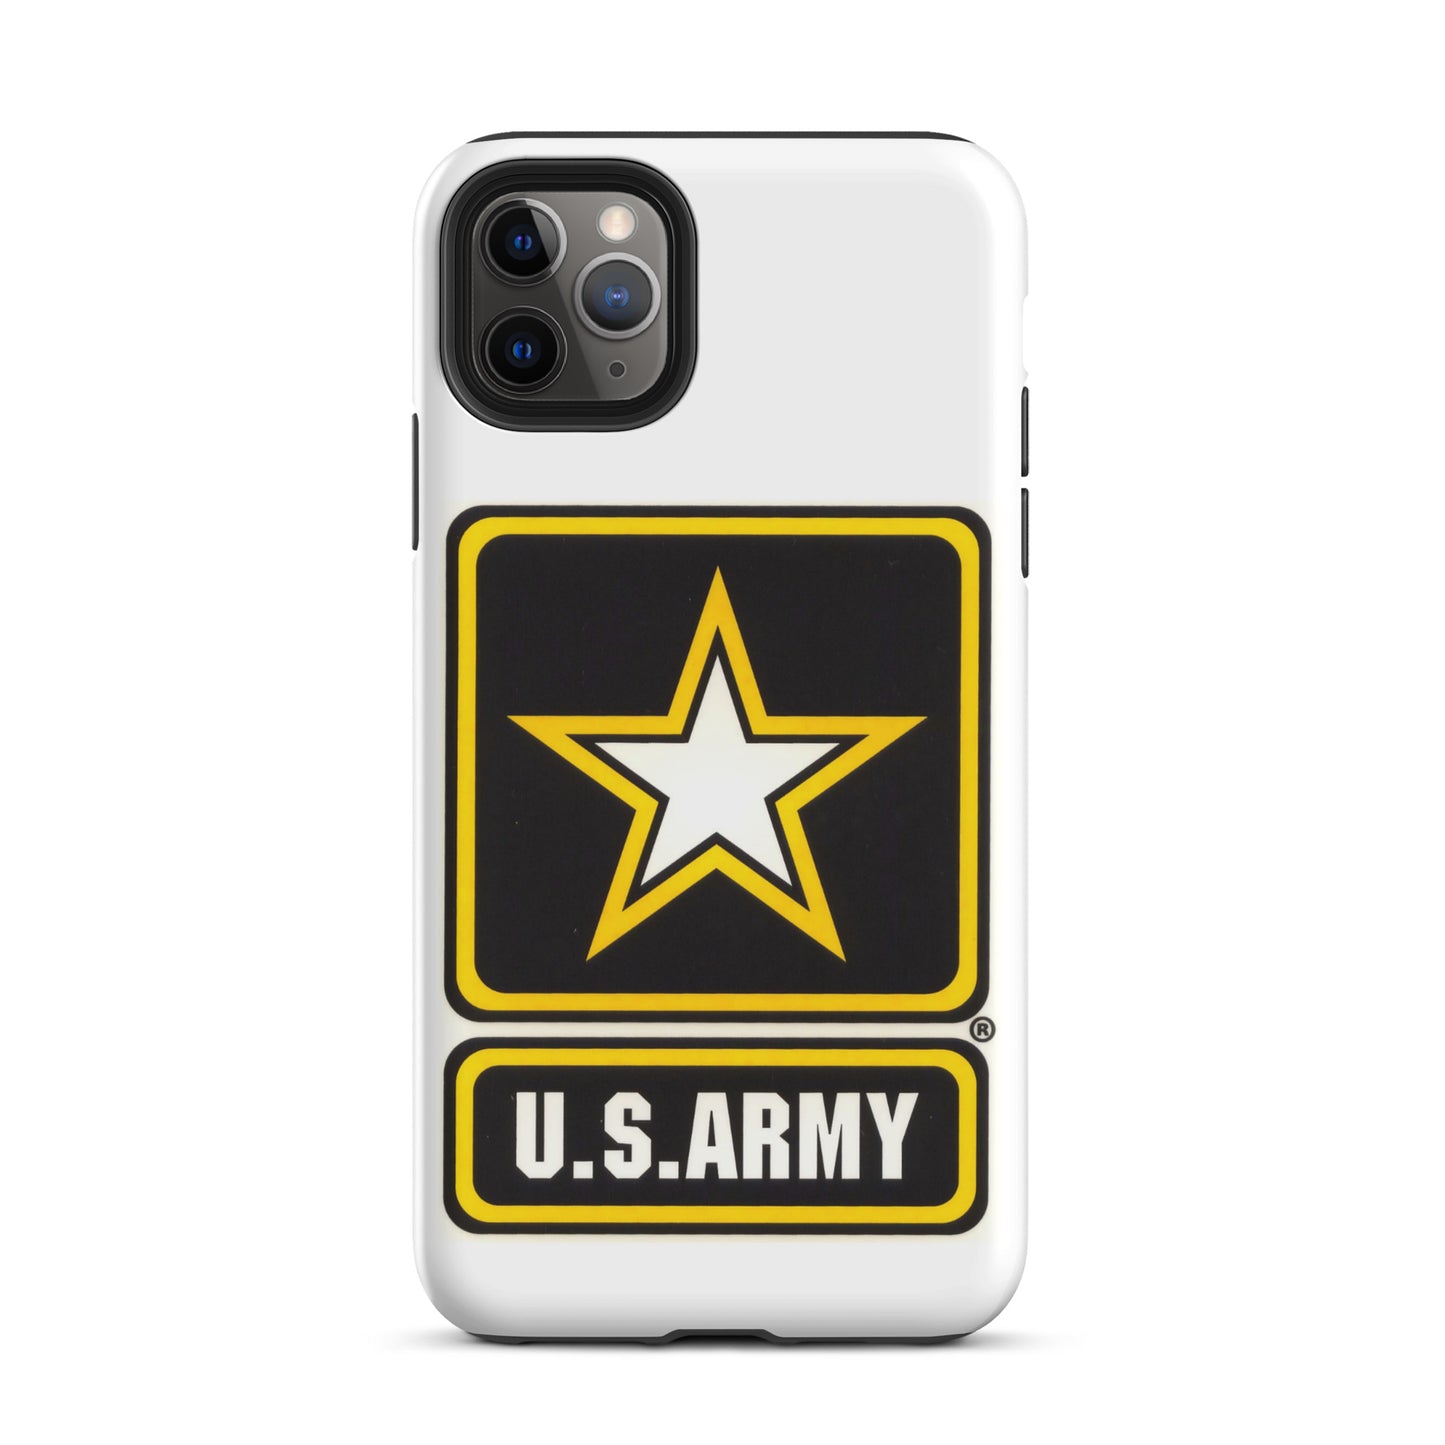 Army iPhone case